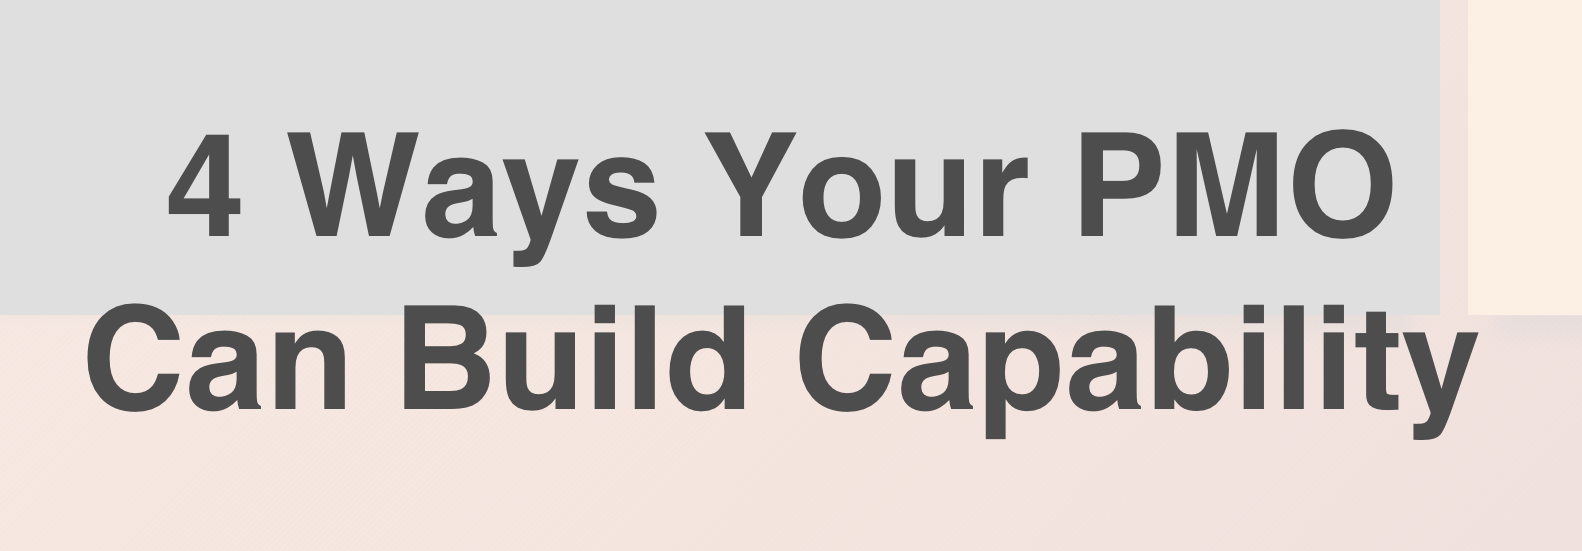 4 Ways Your PMO Can Build Capability